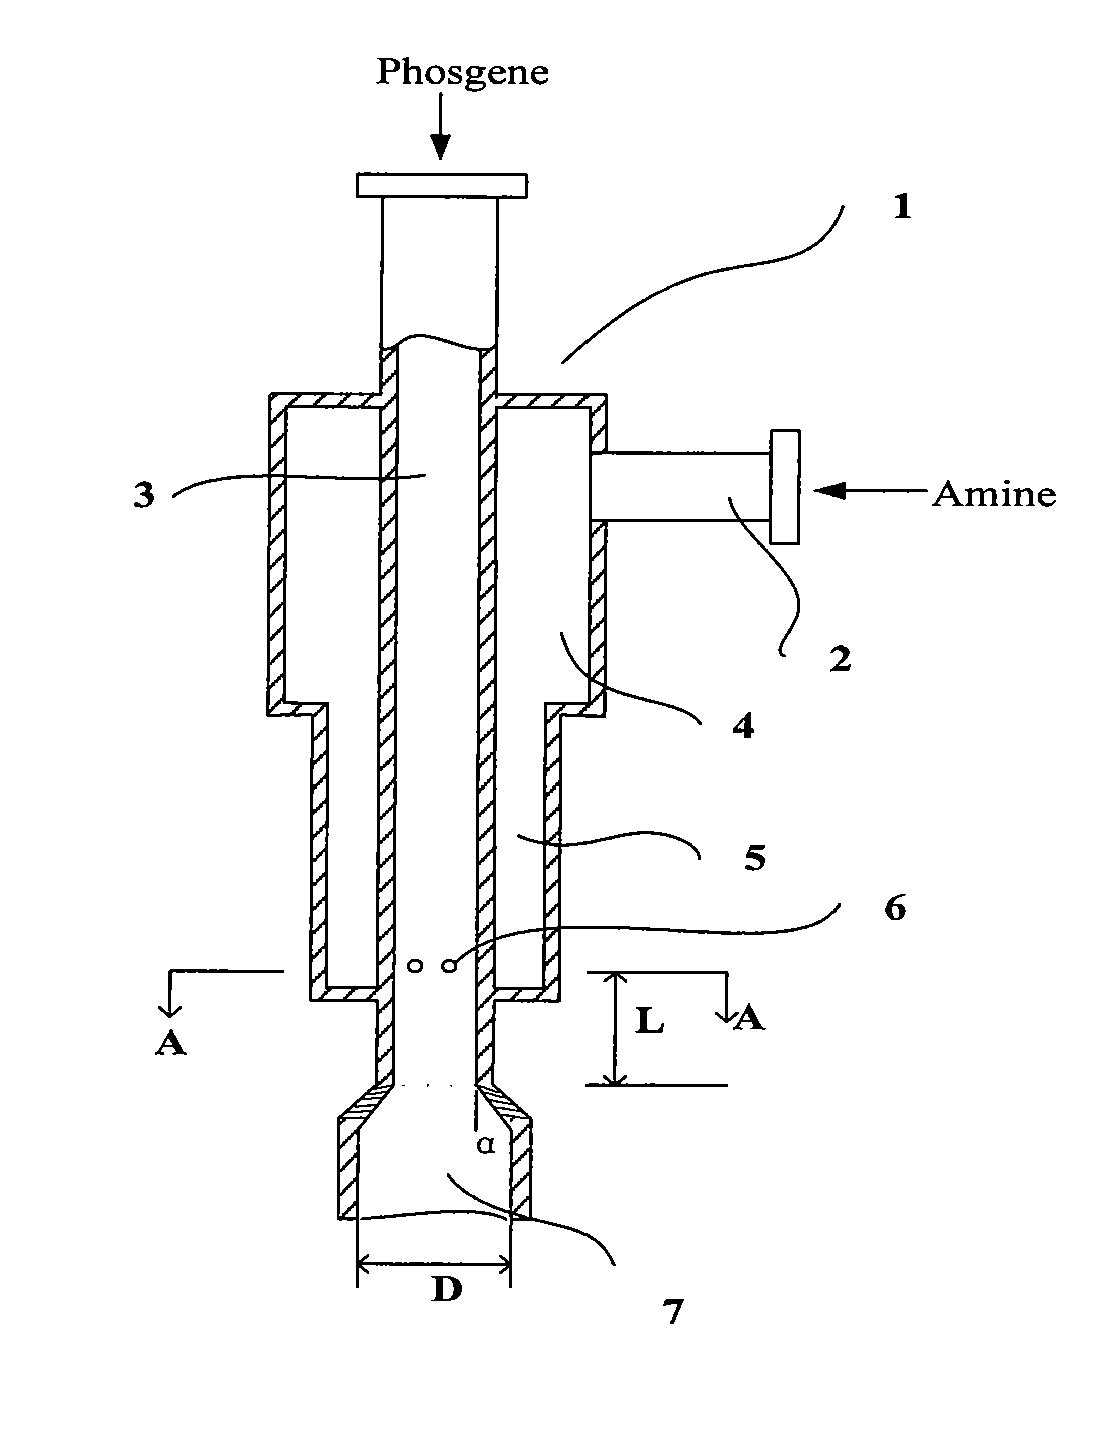 Jet reactor with flow ducts and process for preparing isocyanates using it